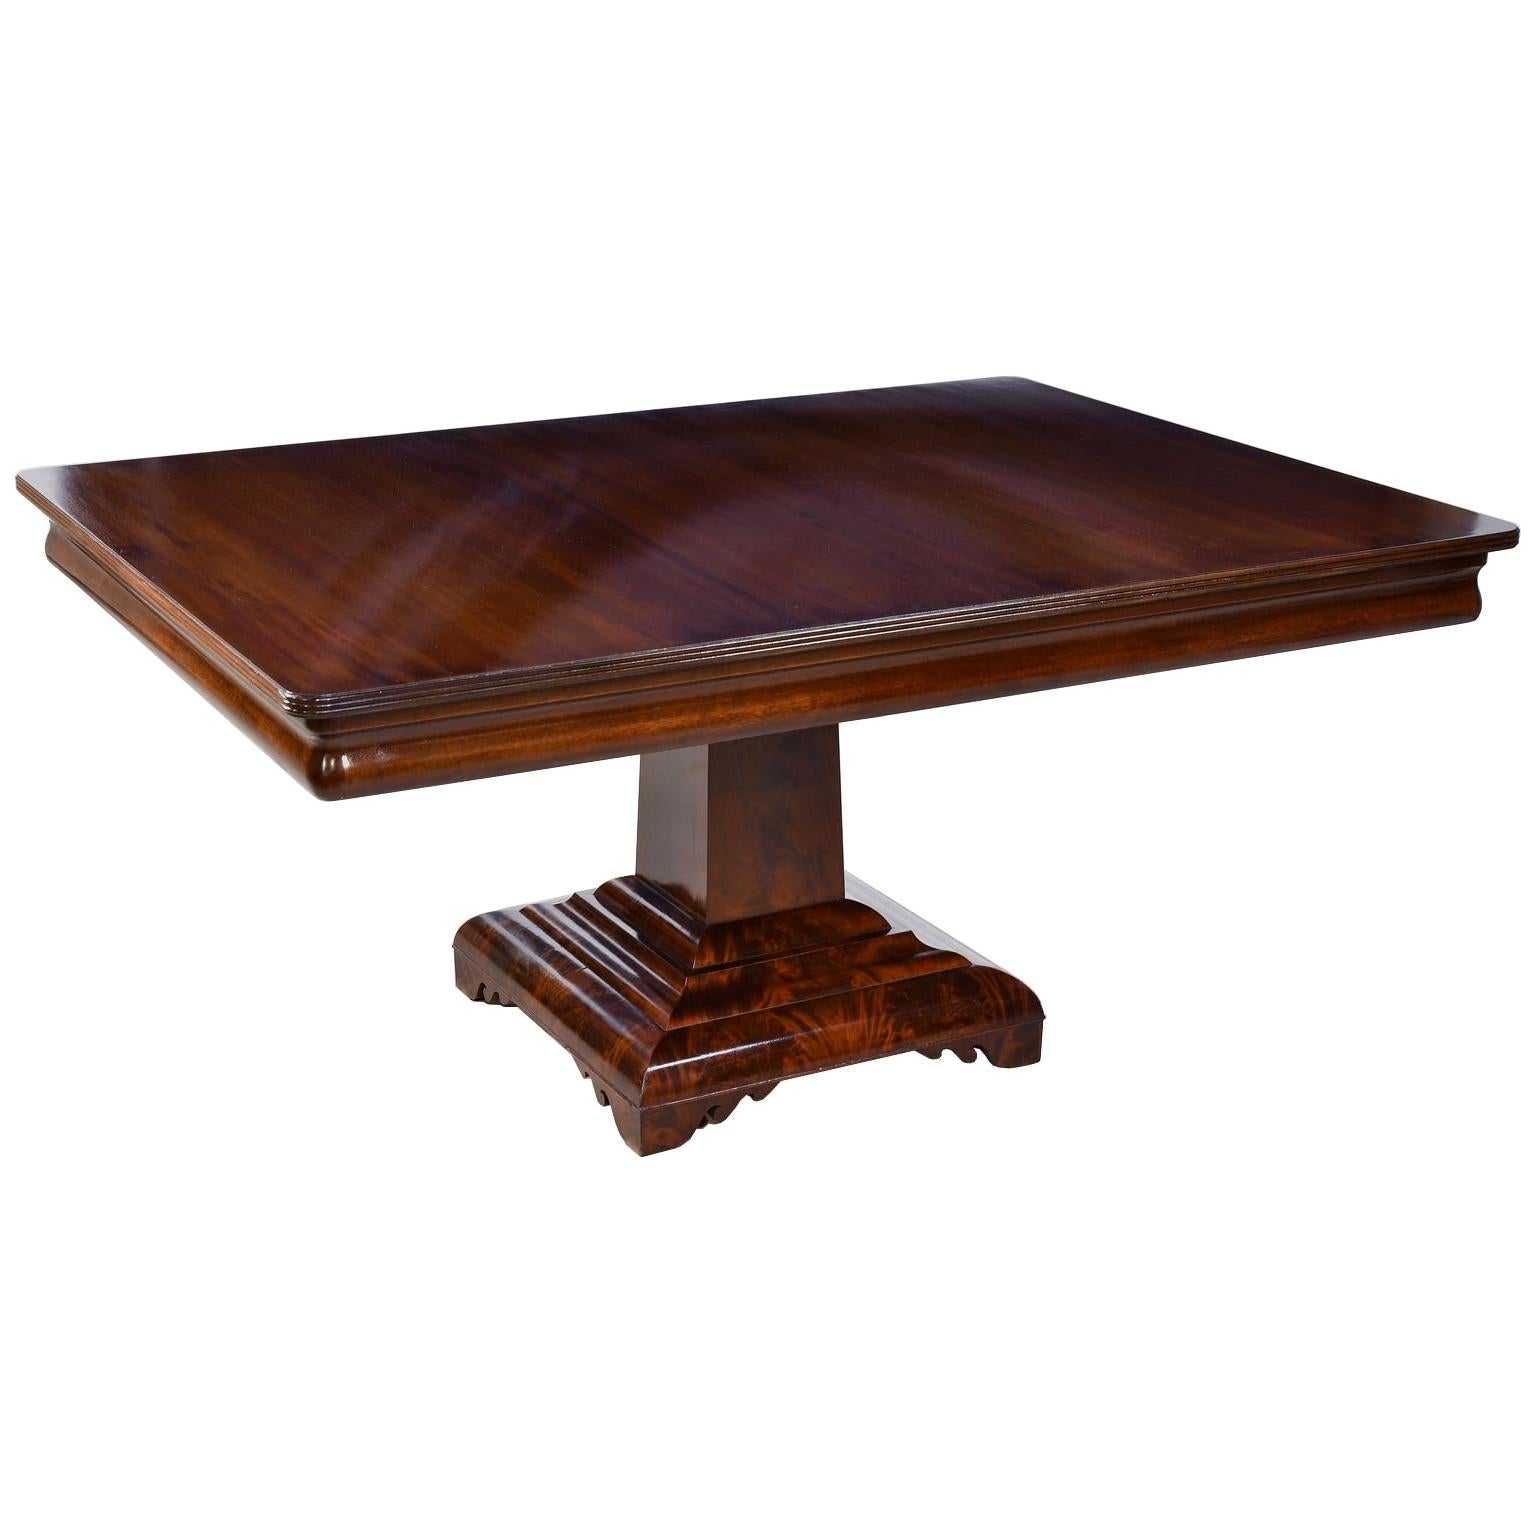 American Empire/Classical Dining Table in Mahogany w/ Grecian-Form Pedestal Base